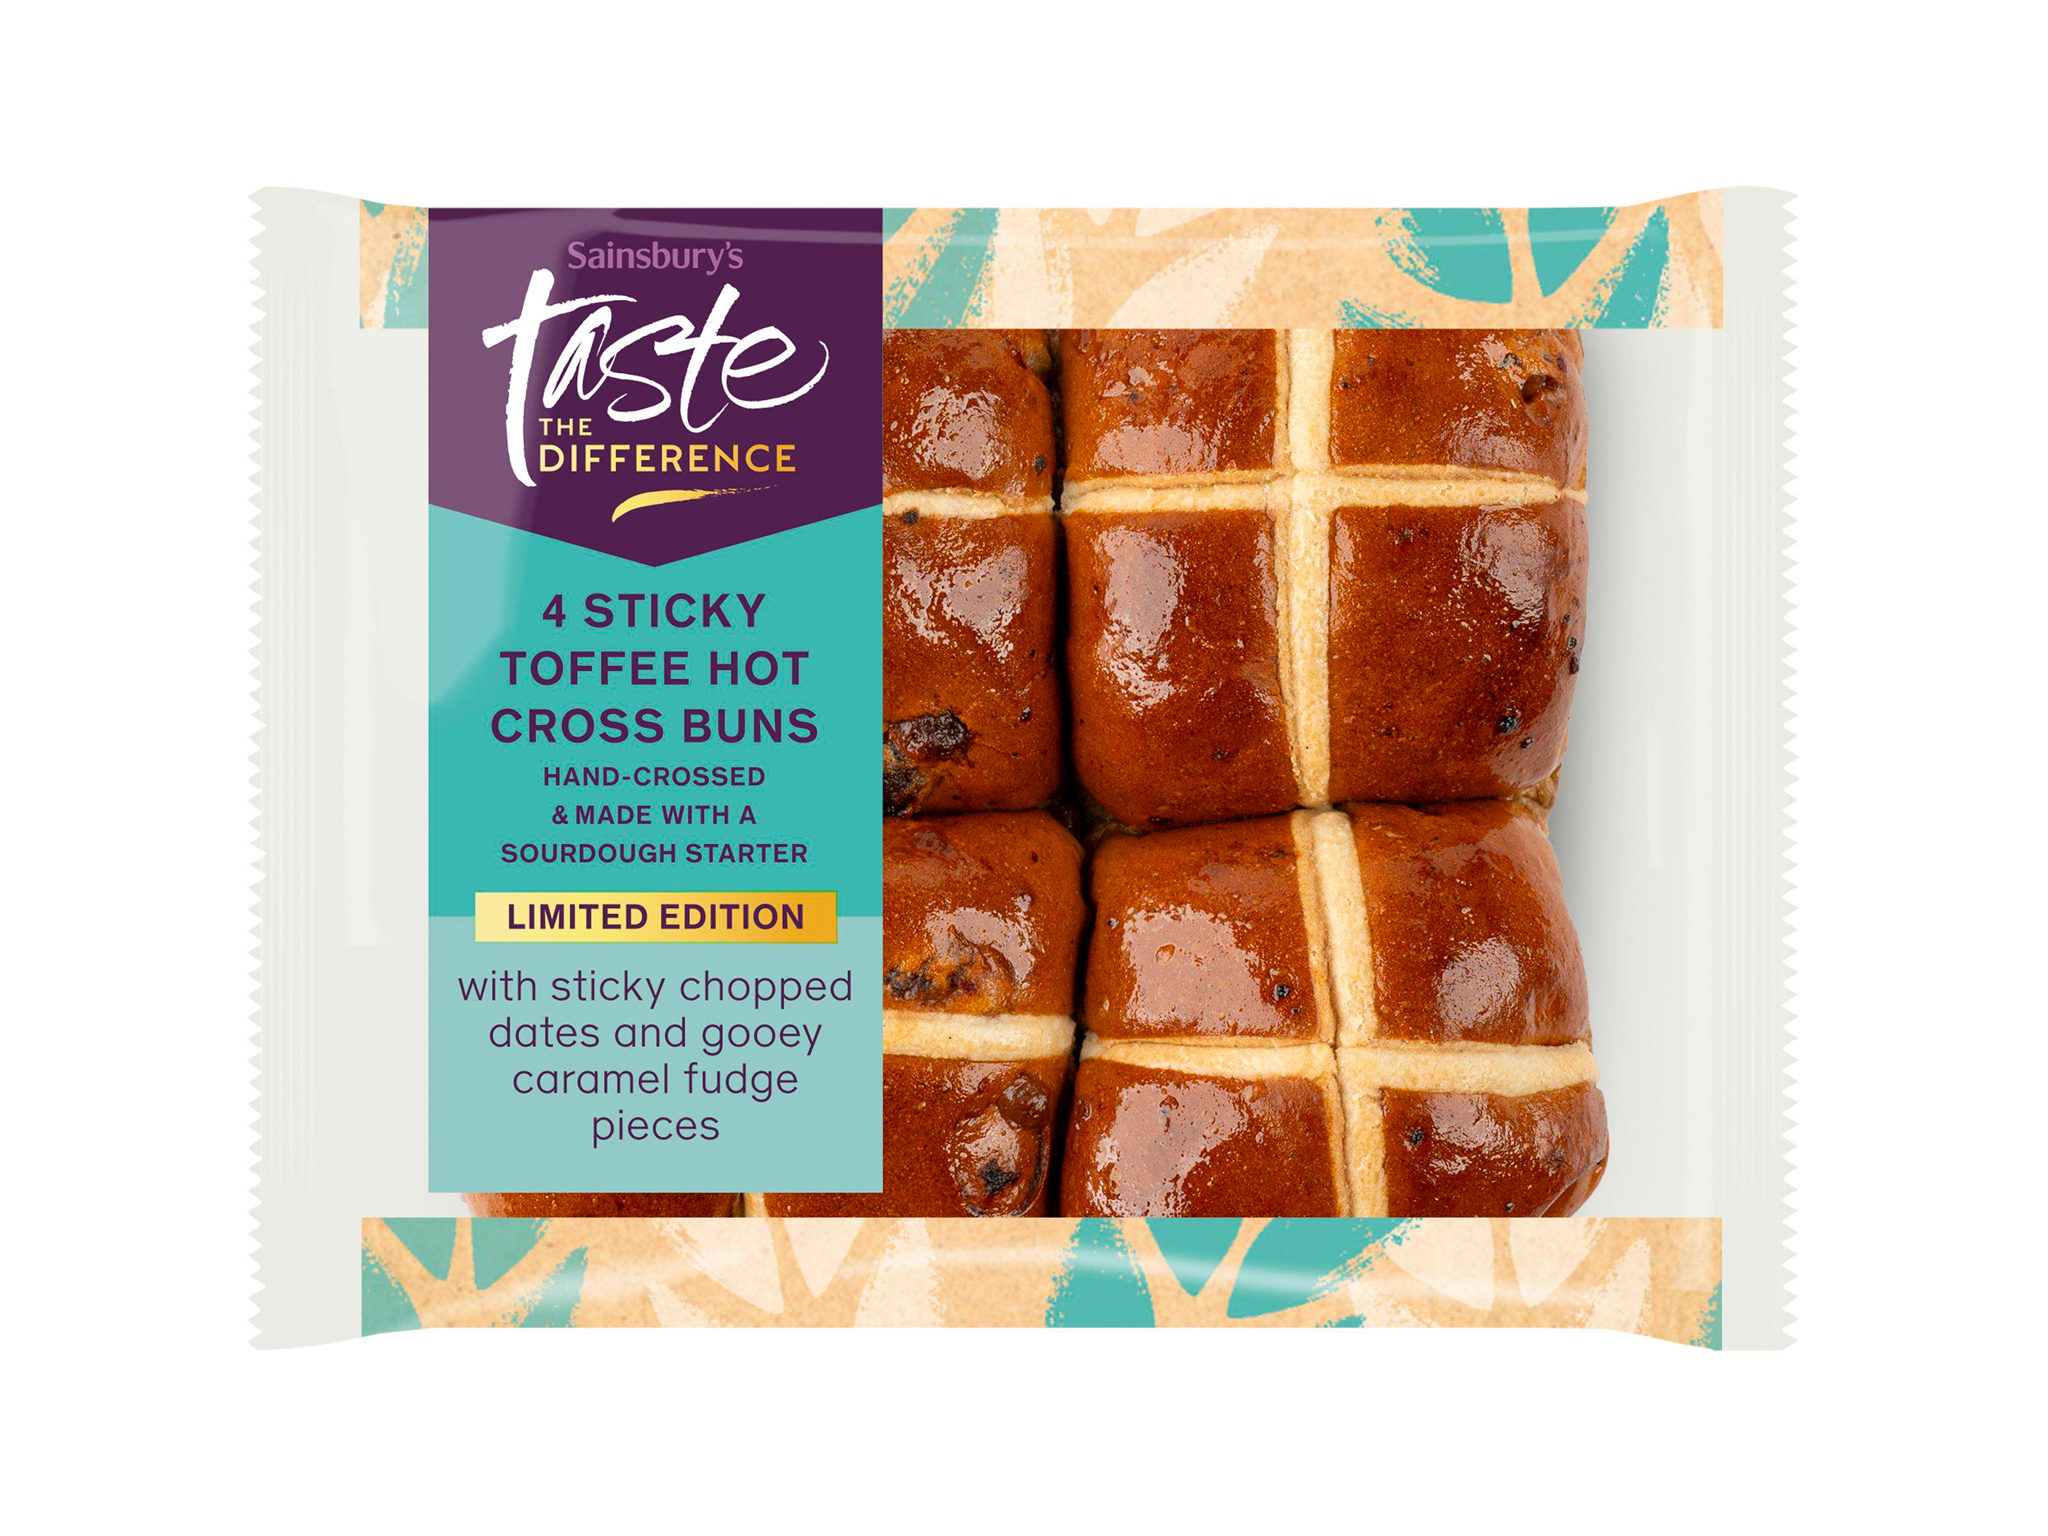 Sticky-toffee-hot-cross-buns-indybest